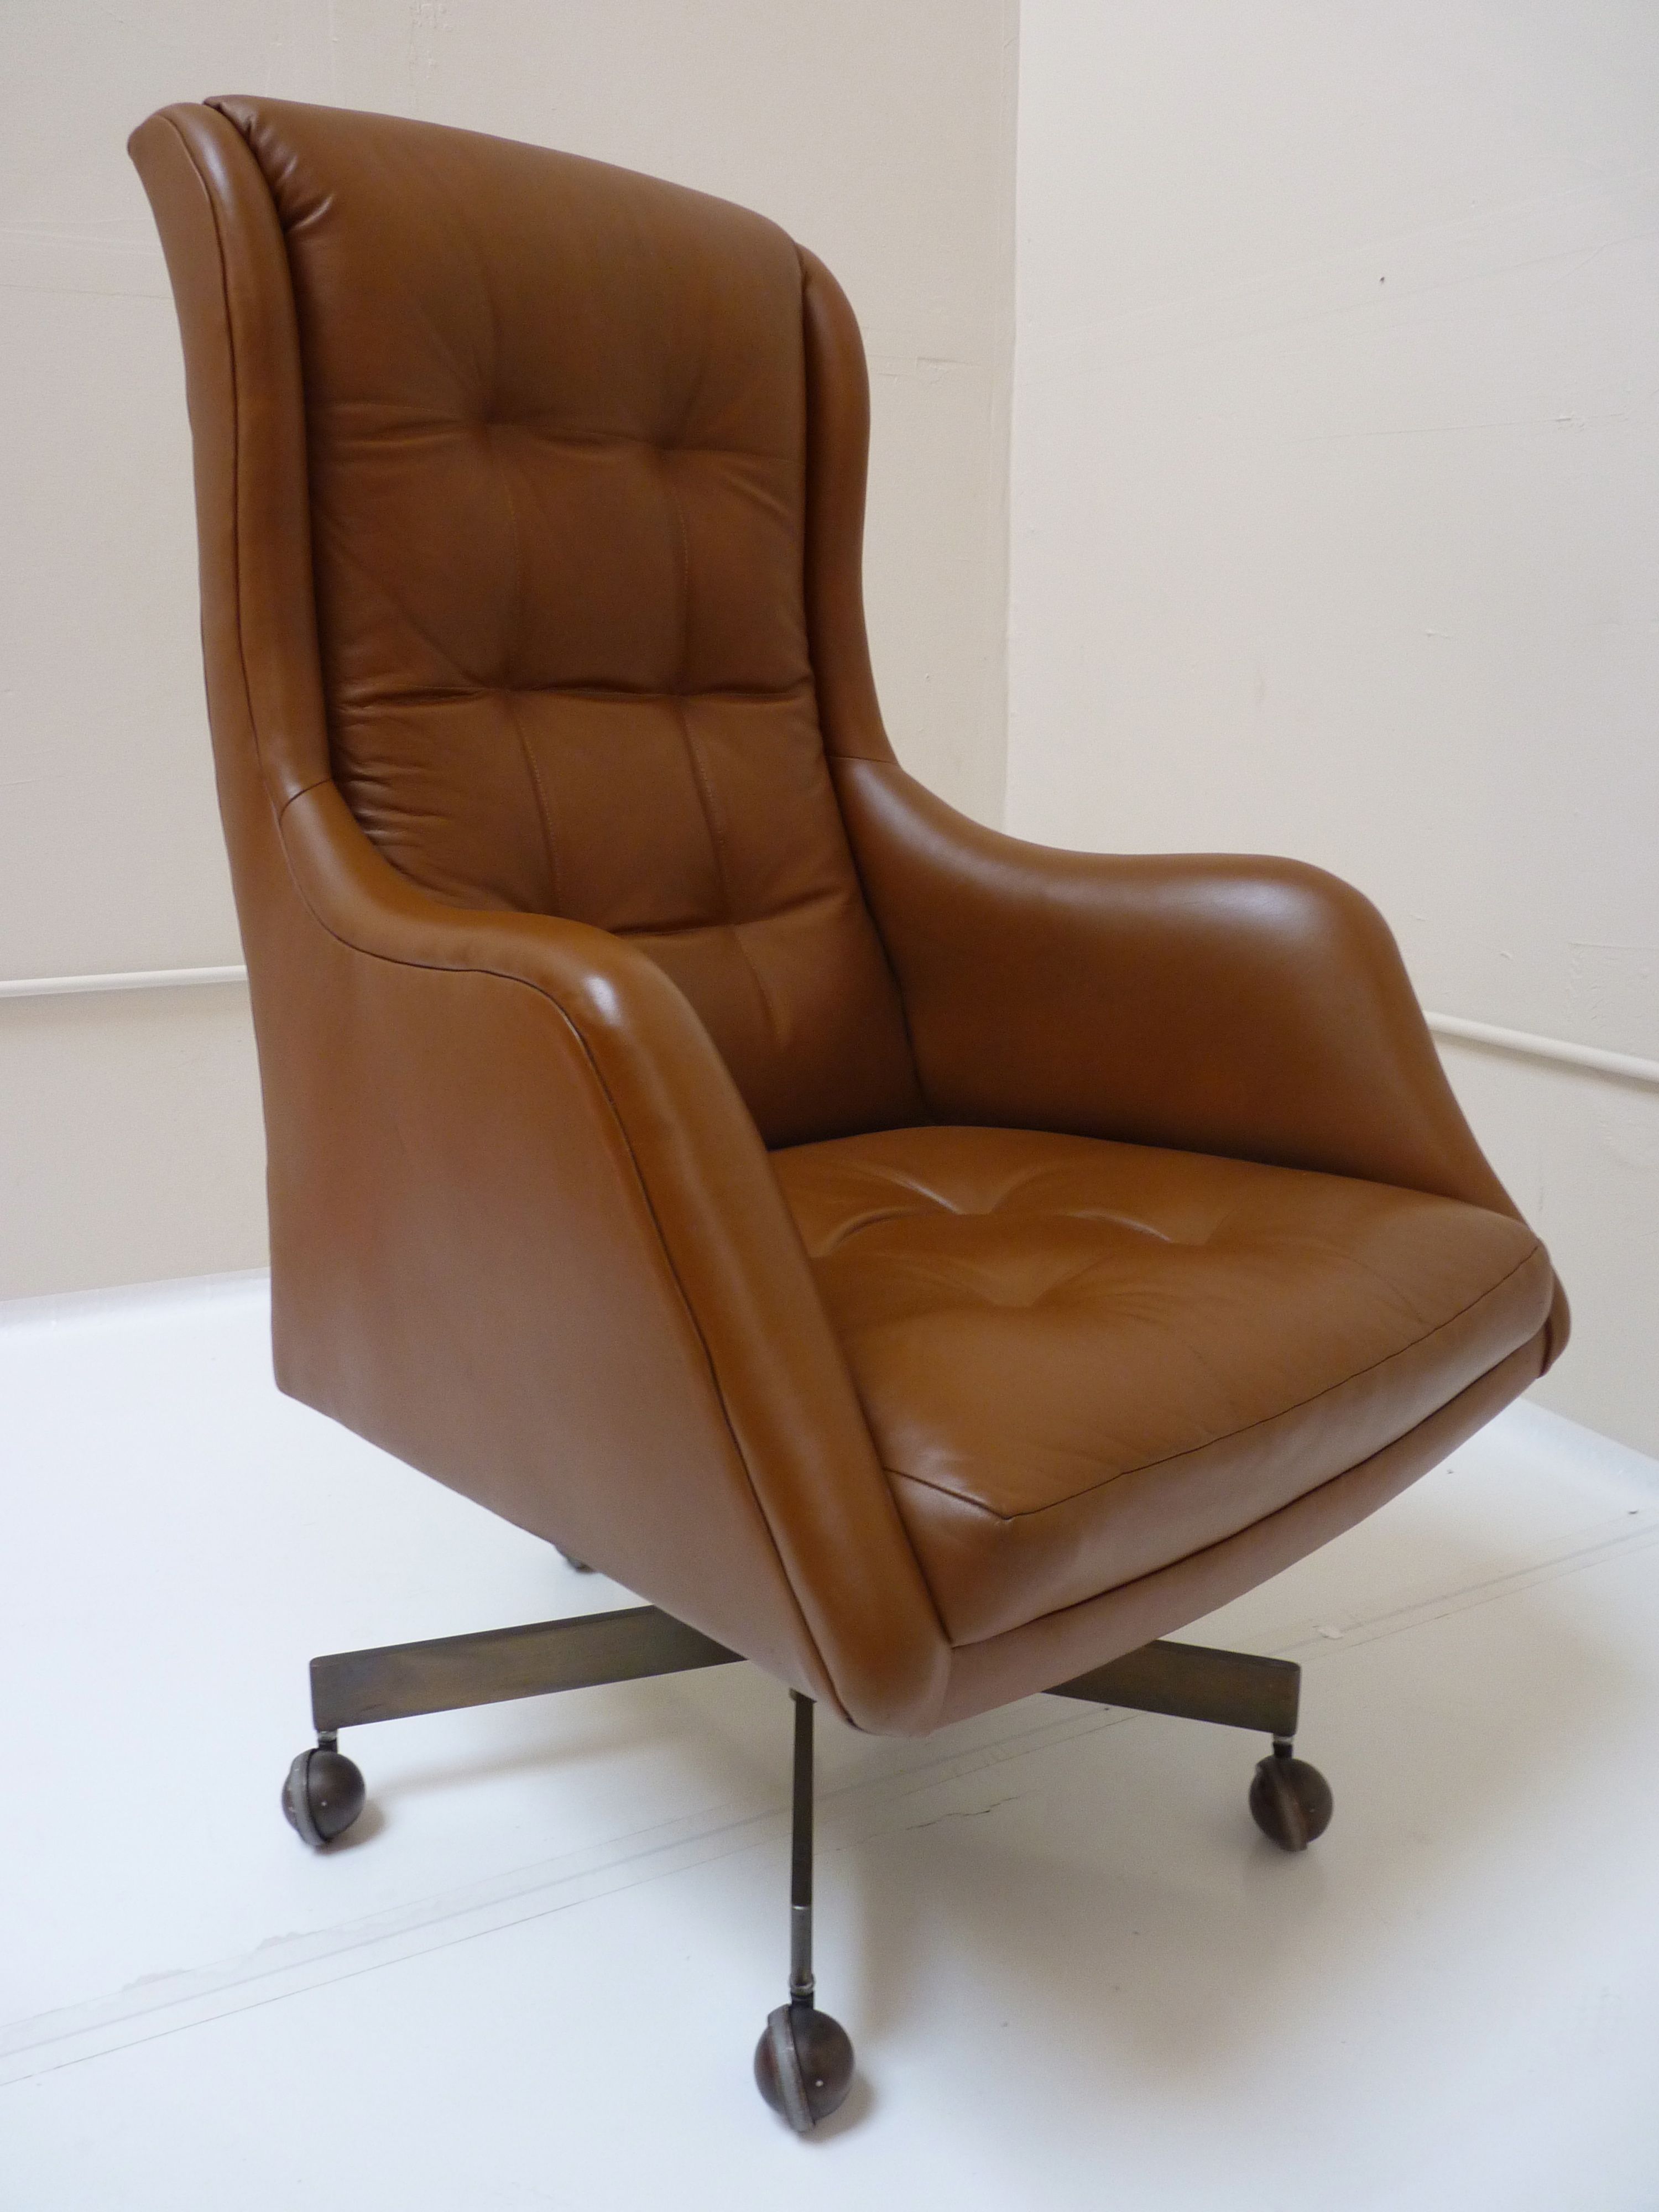 Executive Desk Chair in Leather by Vladimir Kagan